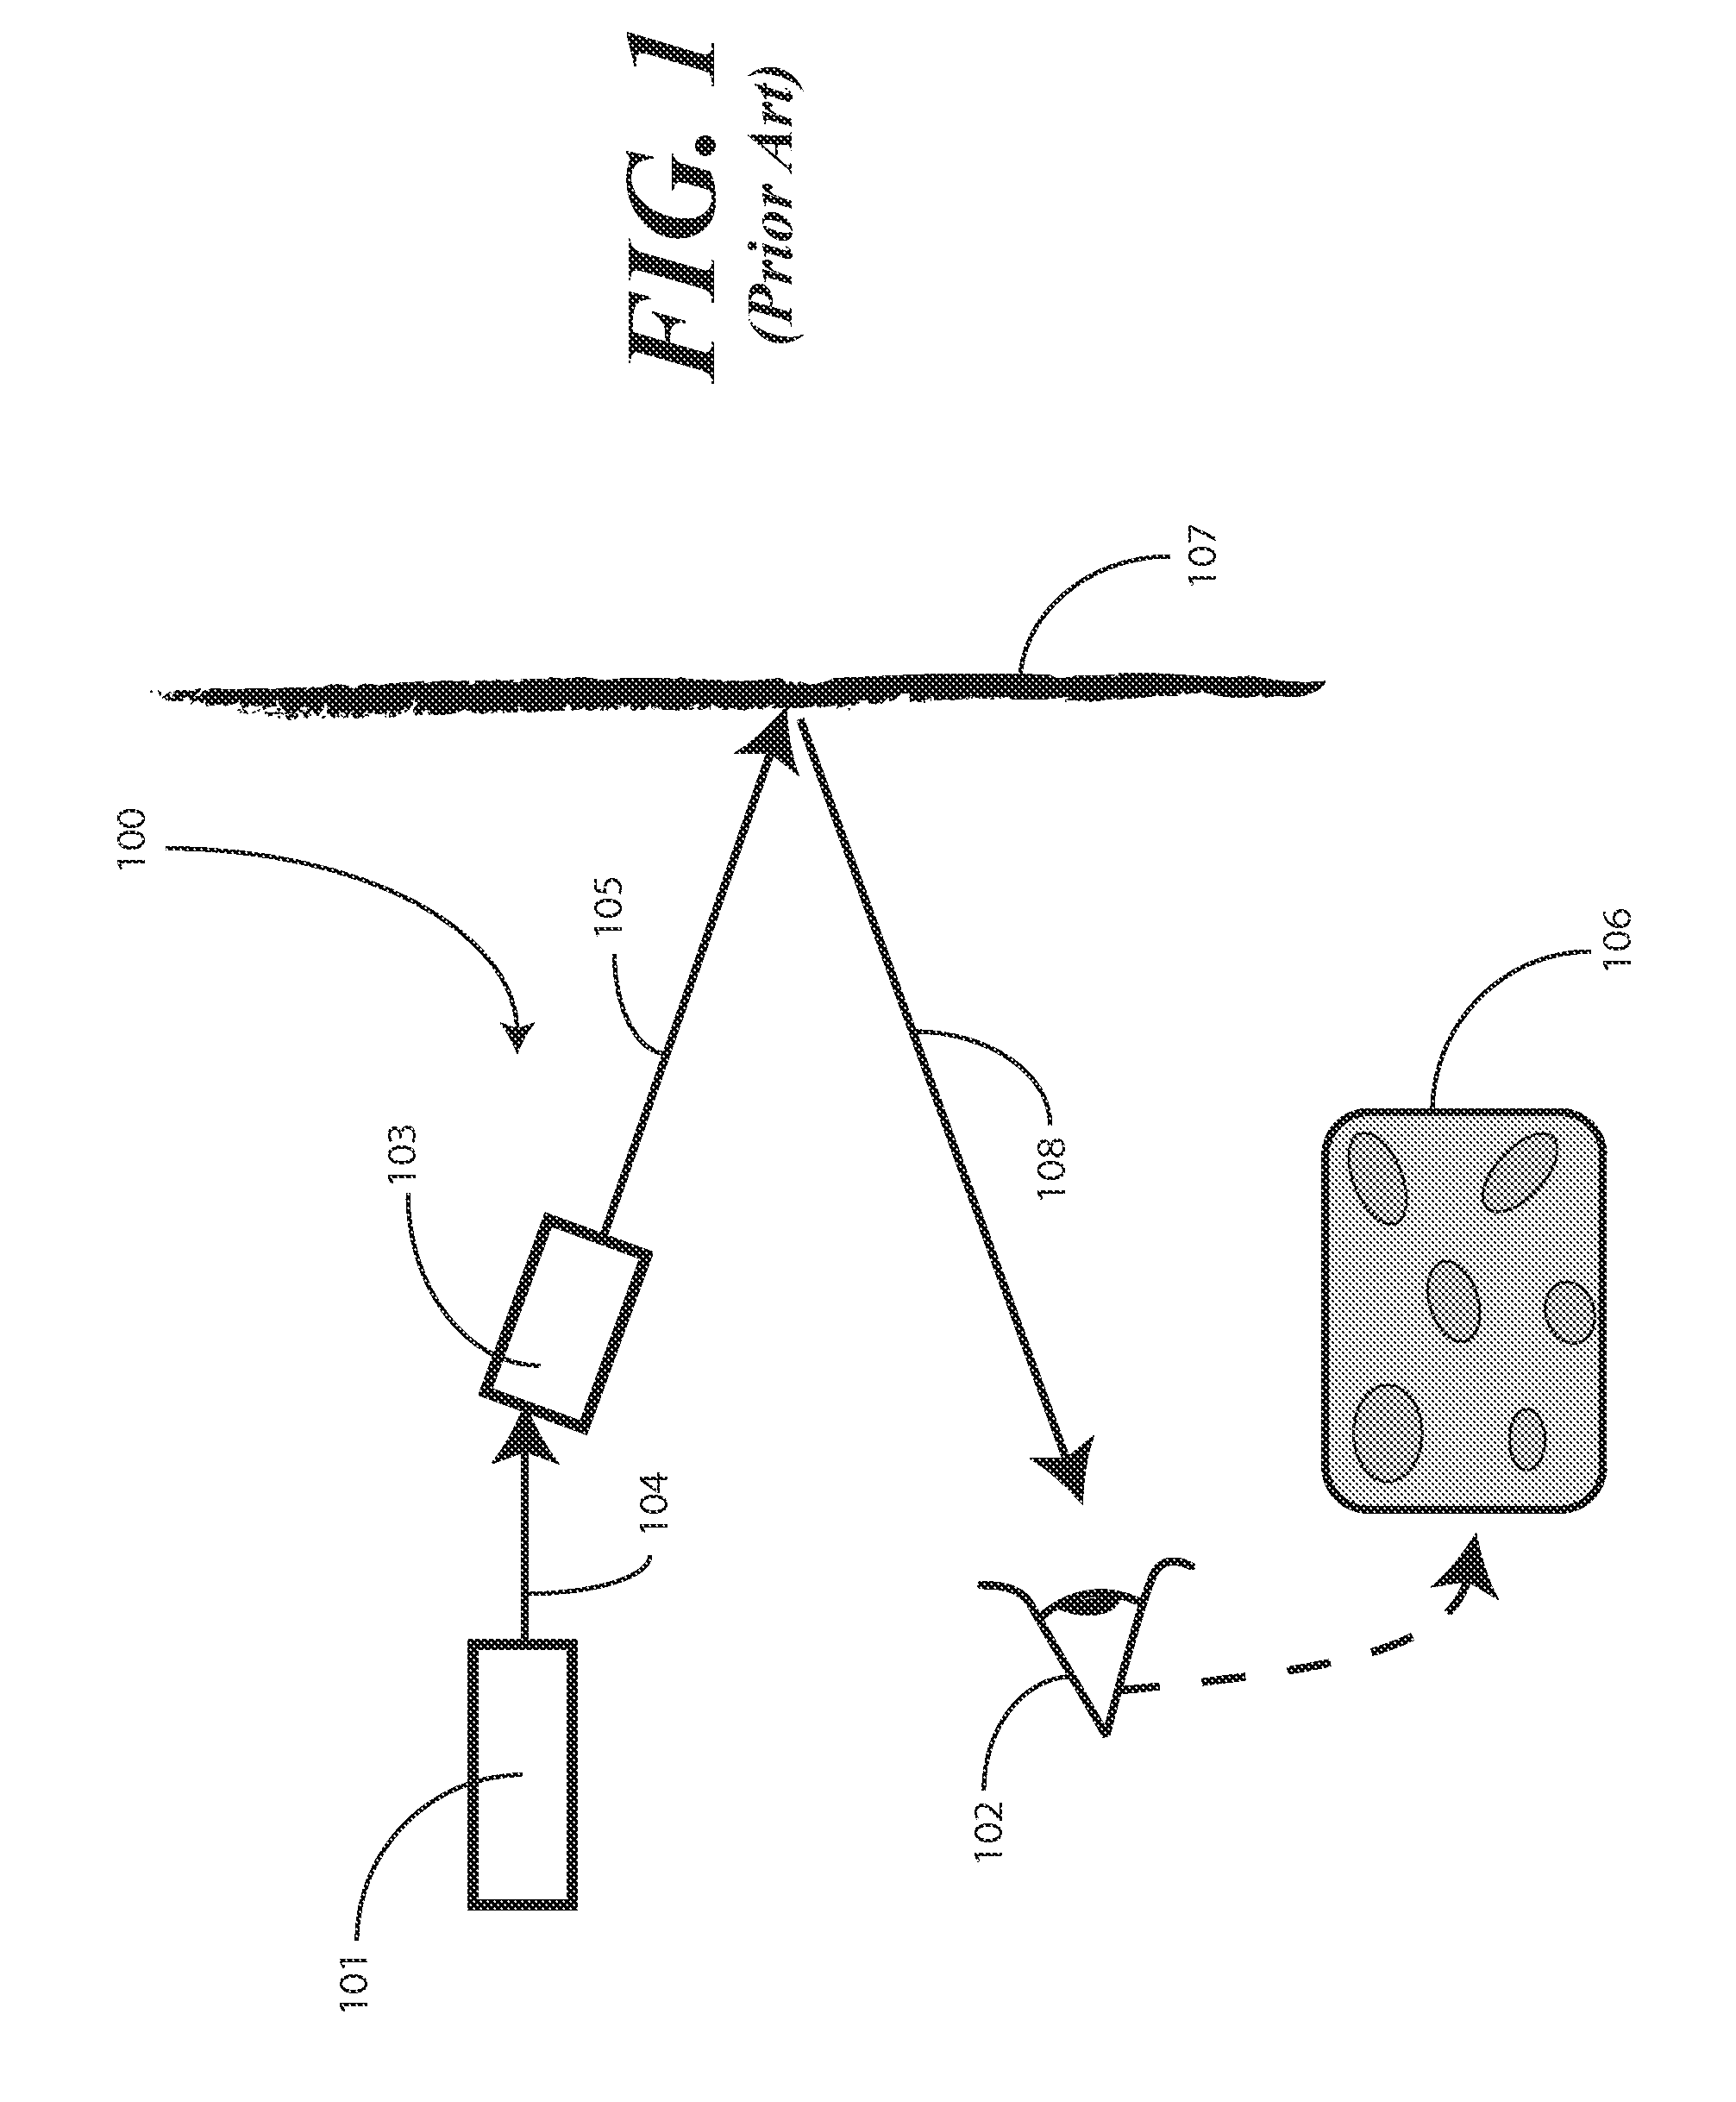 Alternating Beam Laser Imaging System with Reduced Speckle